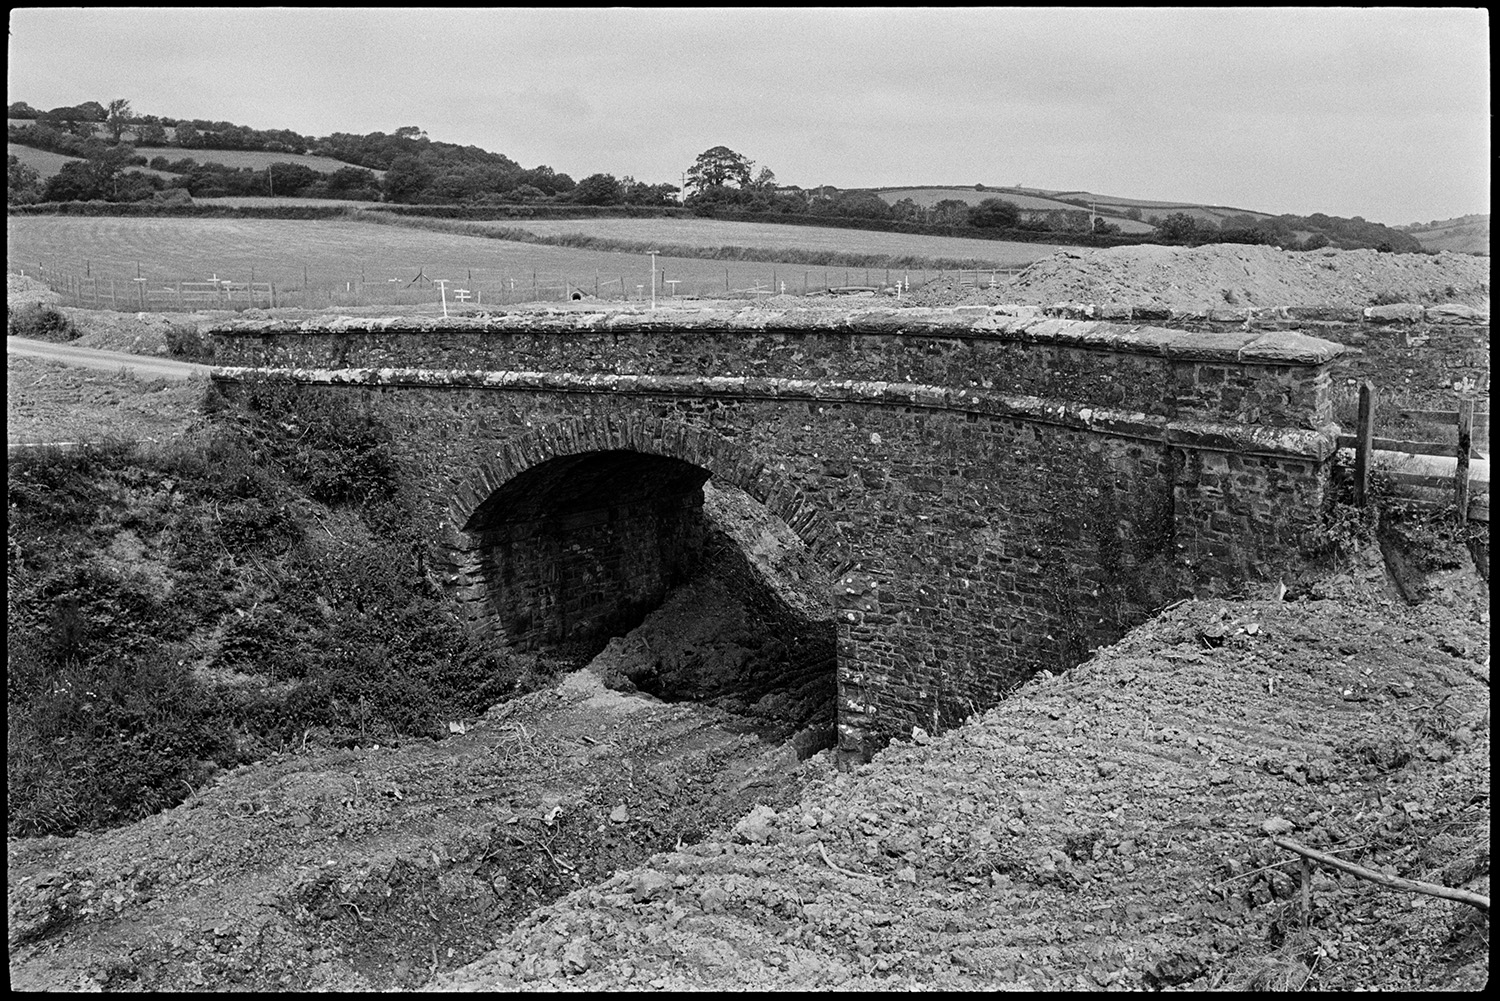 Site of new link road along old railway line. Stone bridge before demolition. Surveyor.<br />
[A bridge over the site of an old railway line near South Molton which is about to be demolished for the construction of the North Devon Link road.]